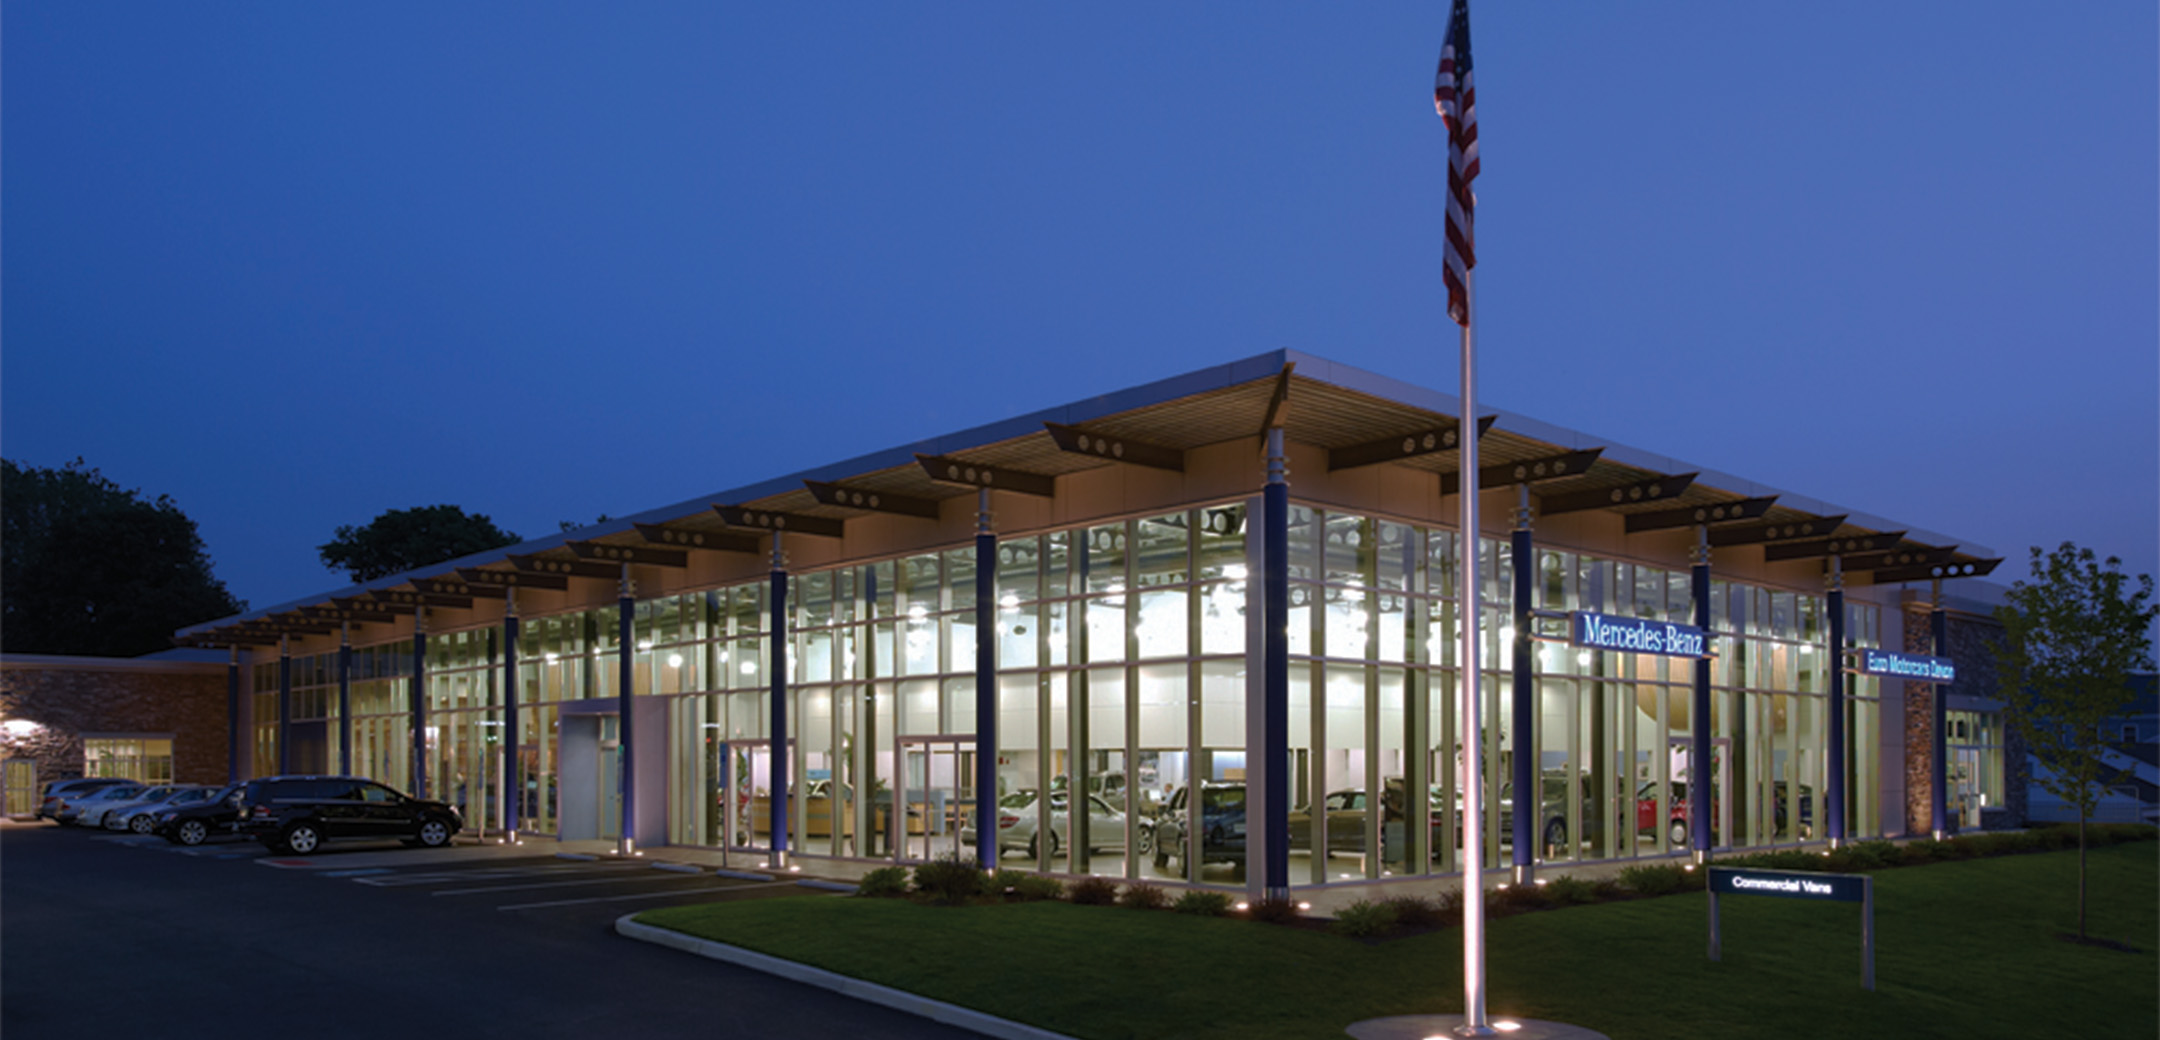 An exterior nighttime view of the Euro Motorcars glass floor to ceiling design building showcasing the cars inside, main parking lot and a flag pole in the foreground with a US flag on it.